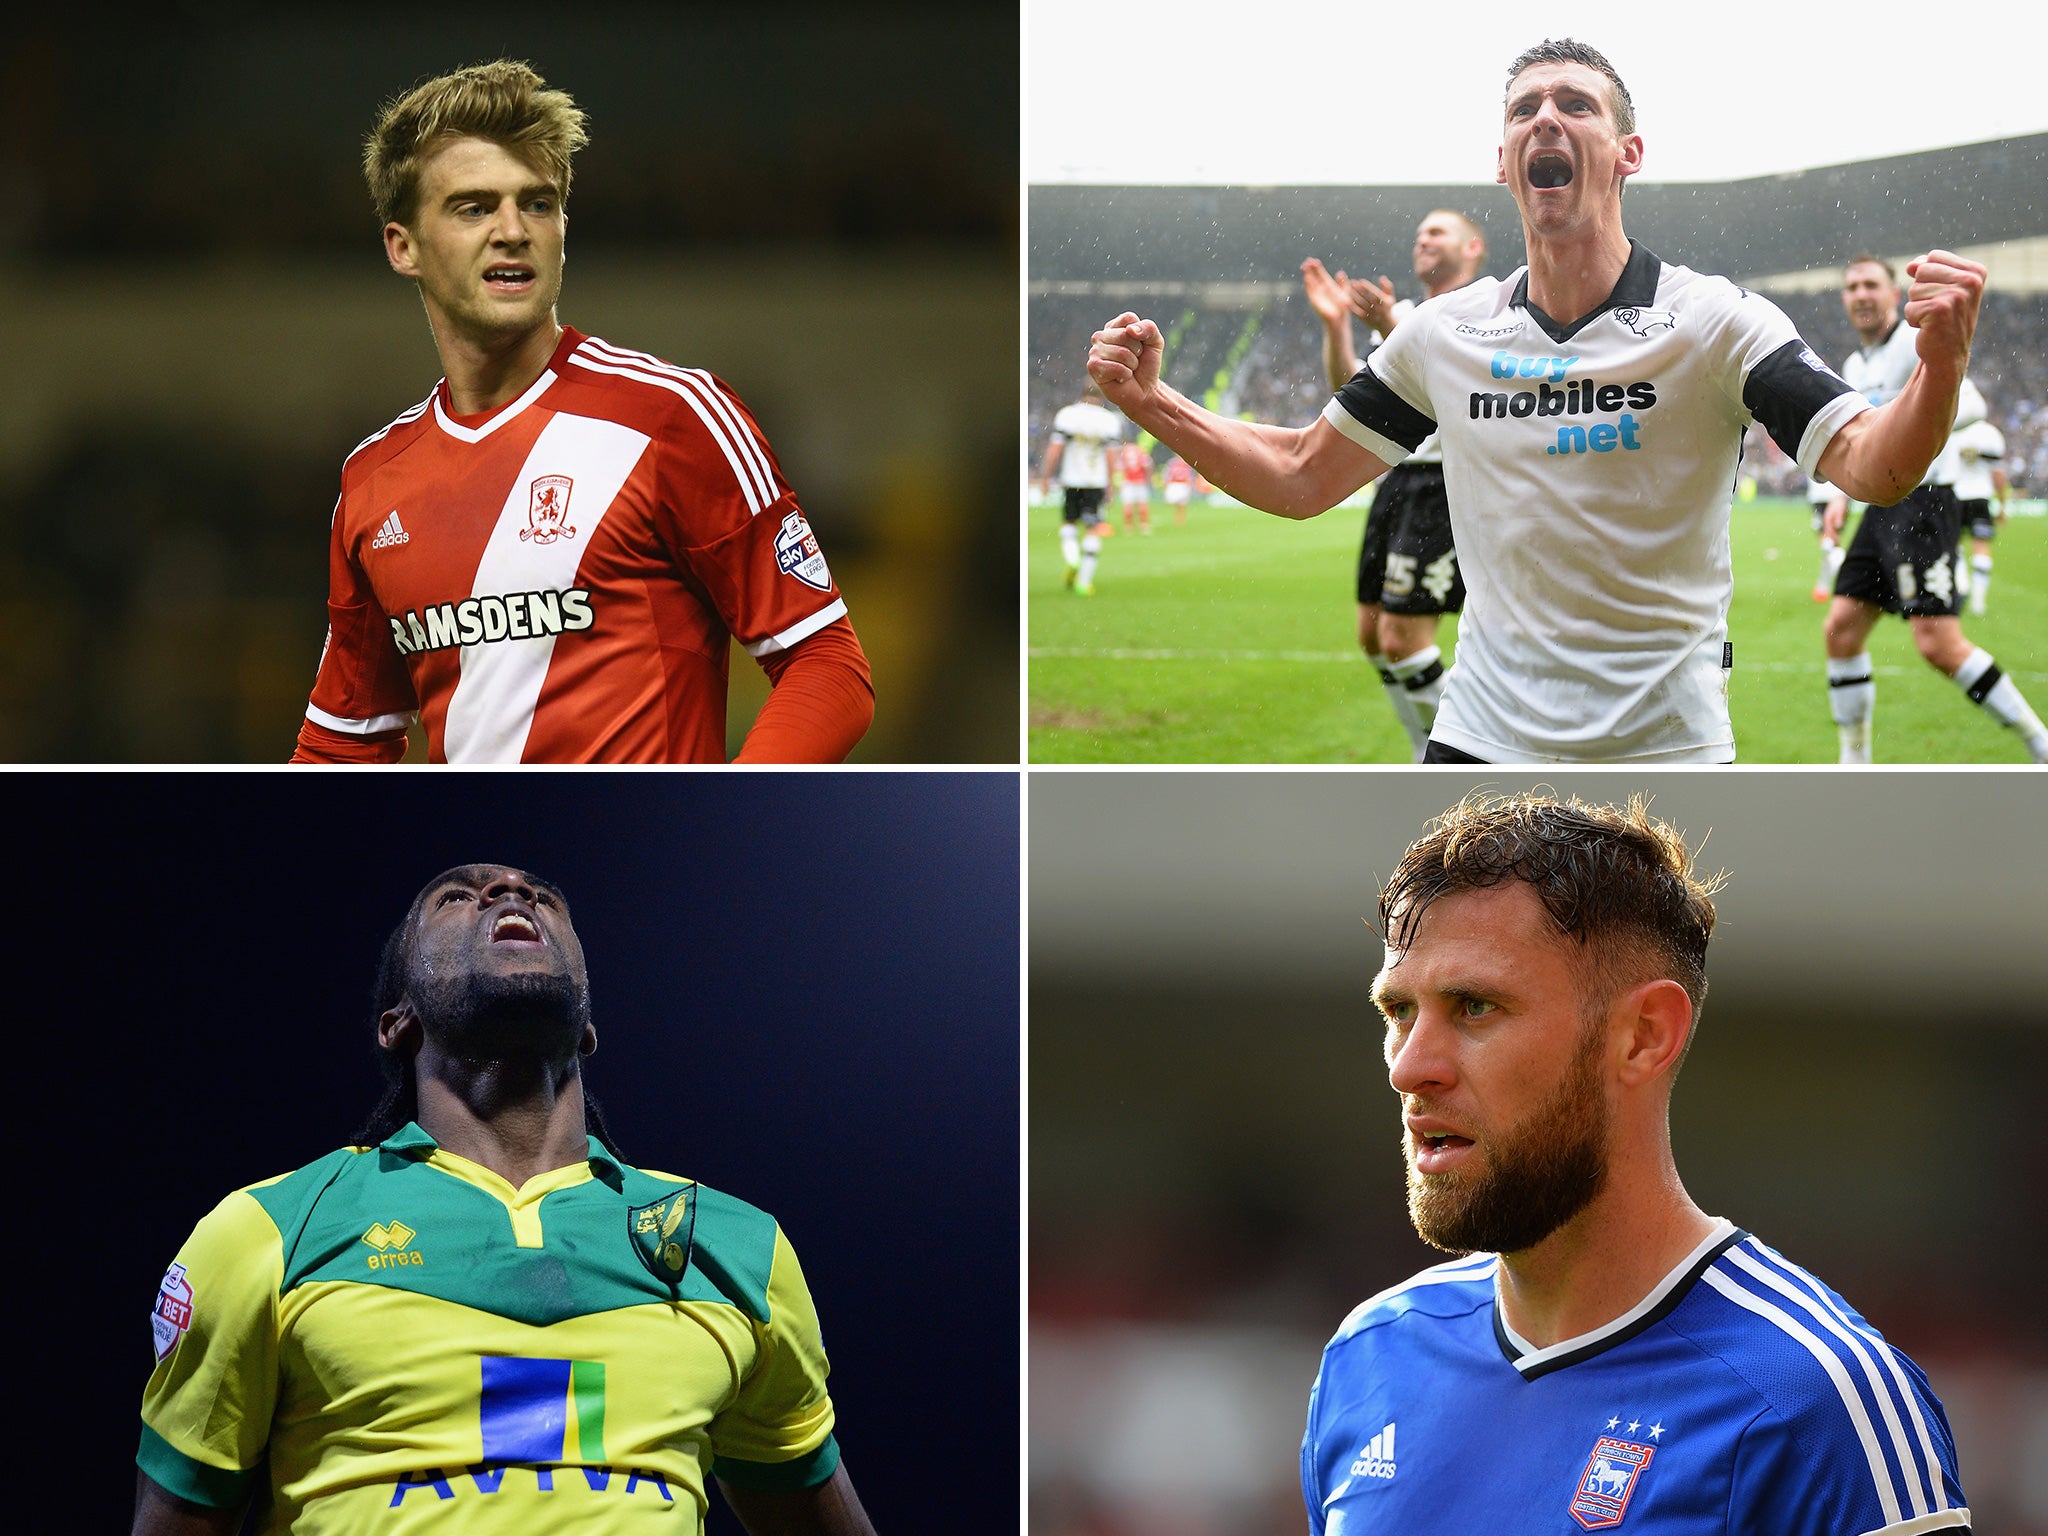 Clockwise from top left: Middlesborough, Derby County, Ipswich and Norwich are all in the hunt for playoff glory